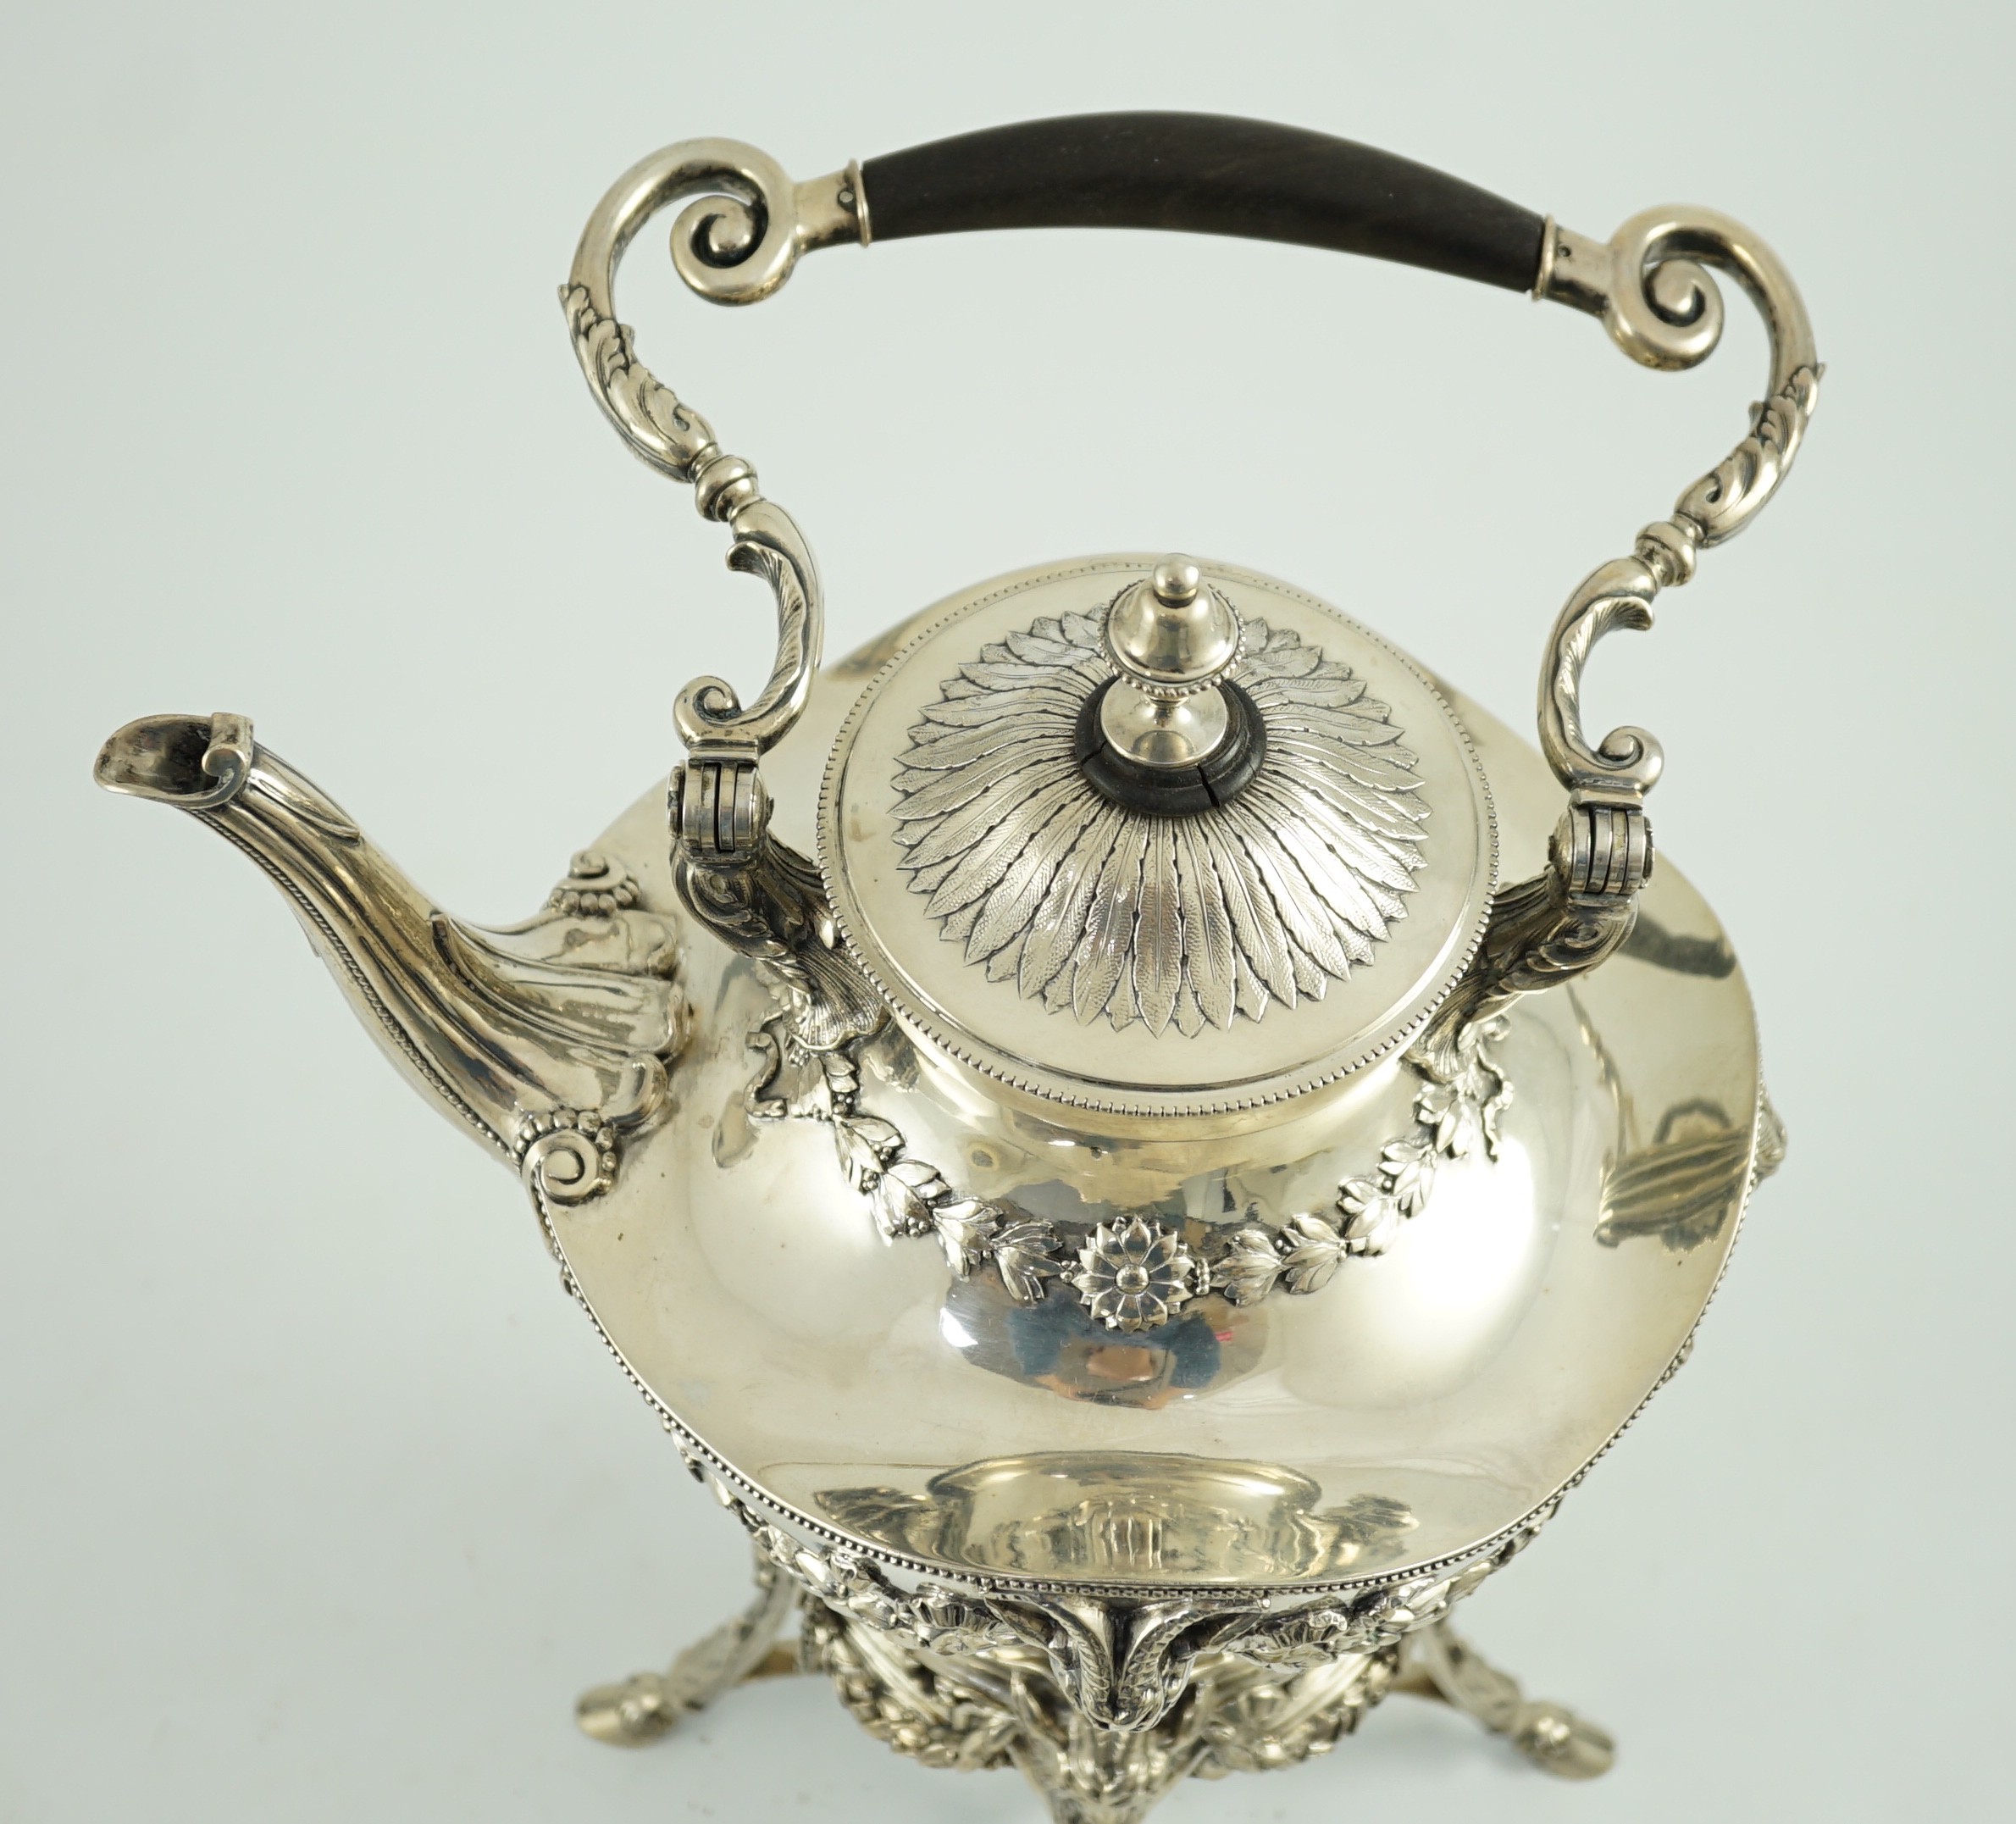 An ornate late 19th/early 20th century Austro-Hungarian 800 standard silver tea kettle on stand